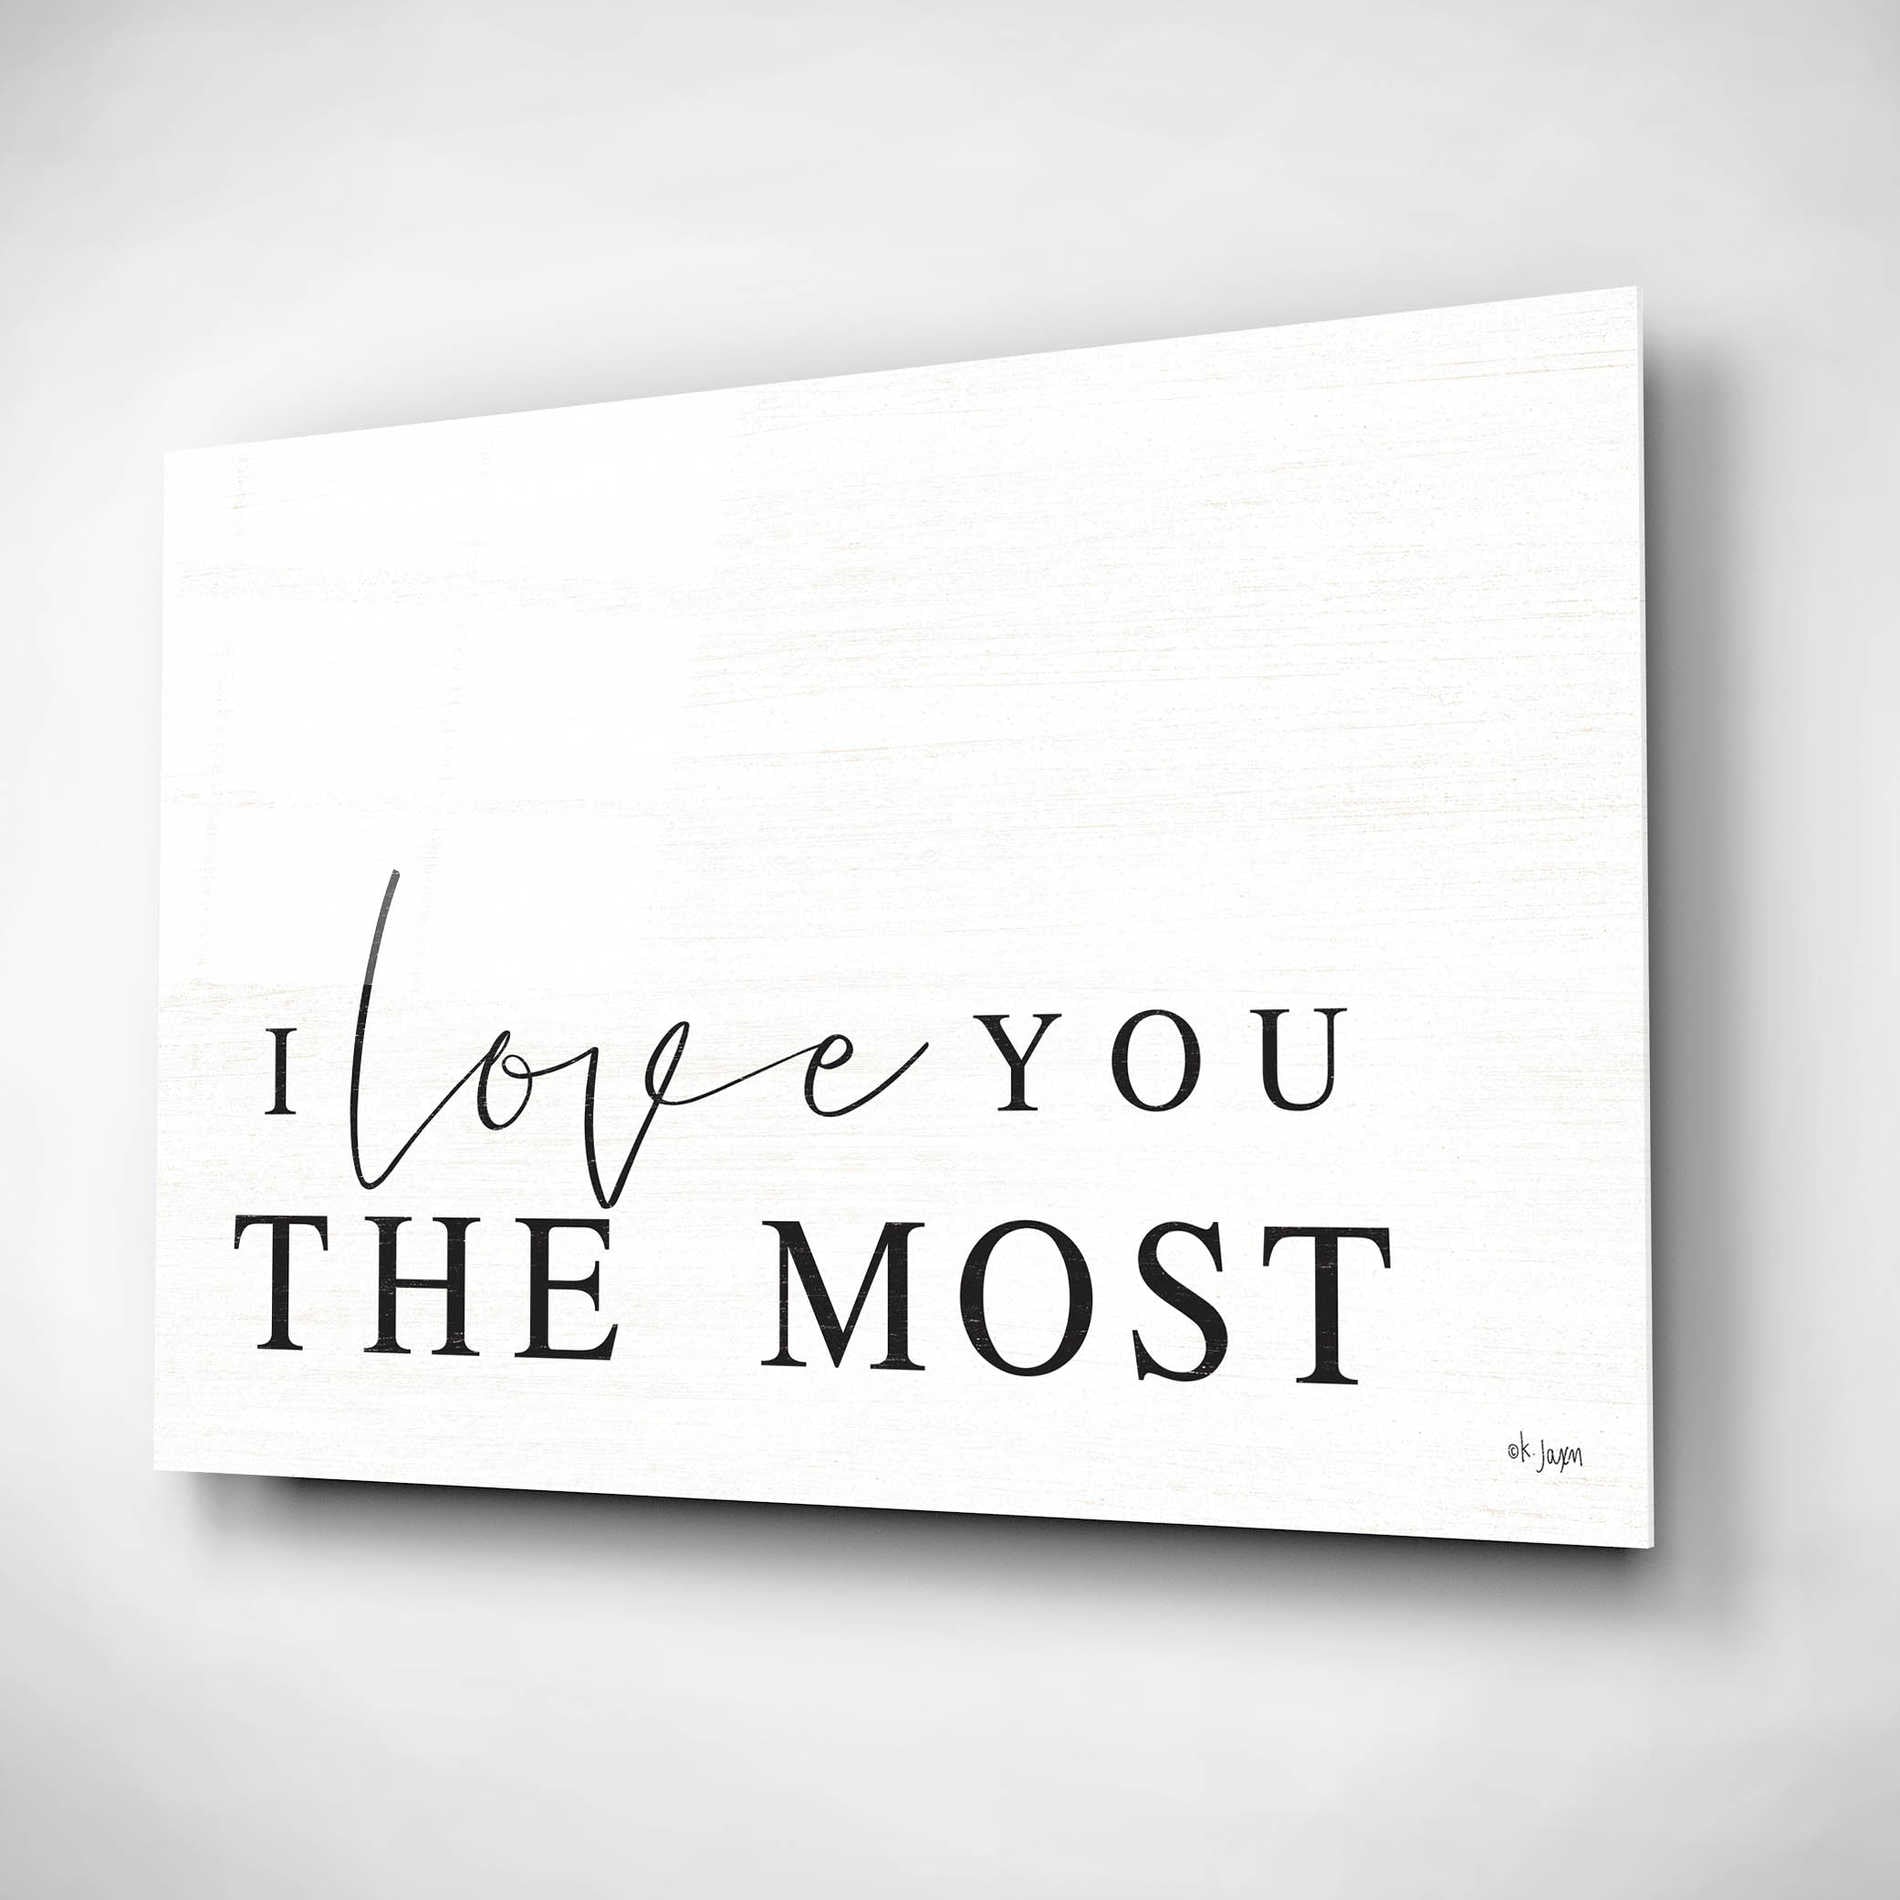 Epic Art 'I Love You the Most' by Jaxn Blvd, Acrylic Glass Wall Art,24x16